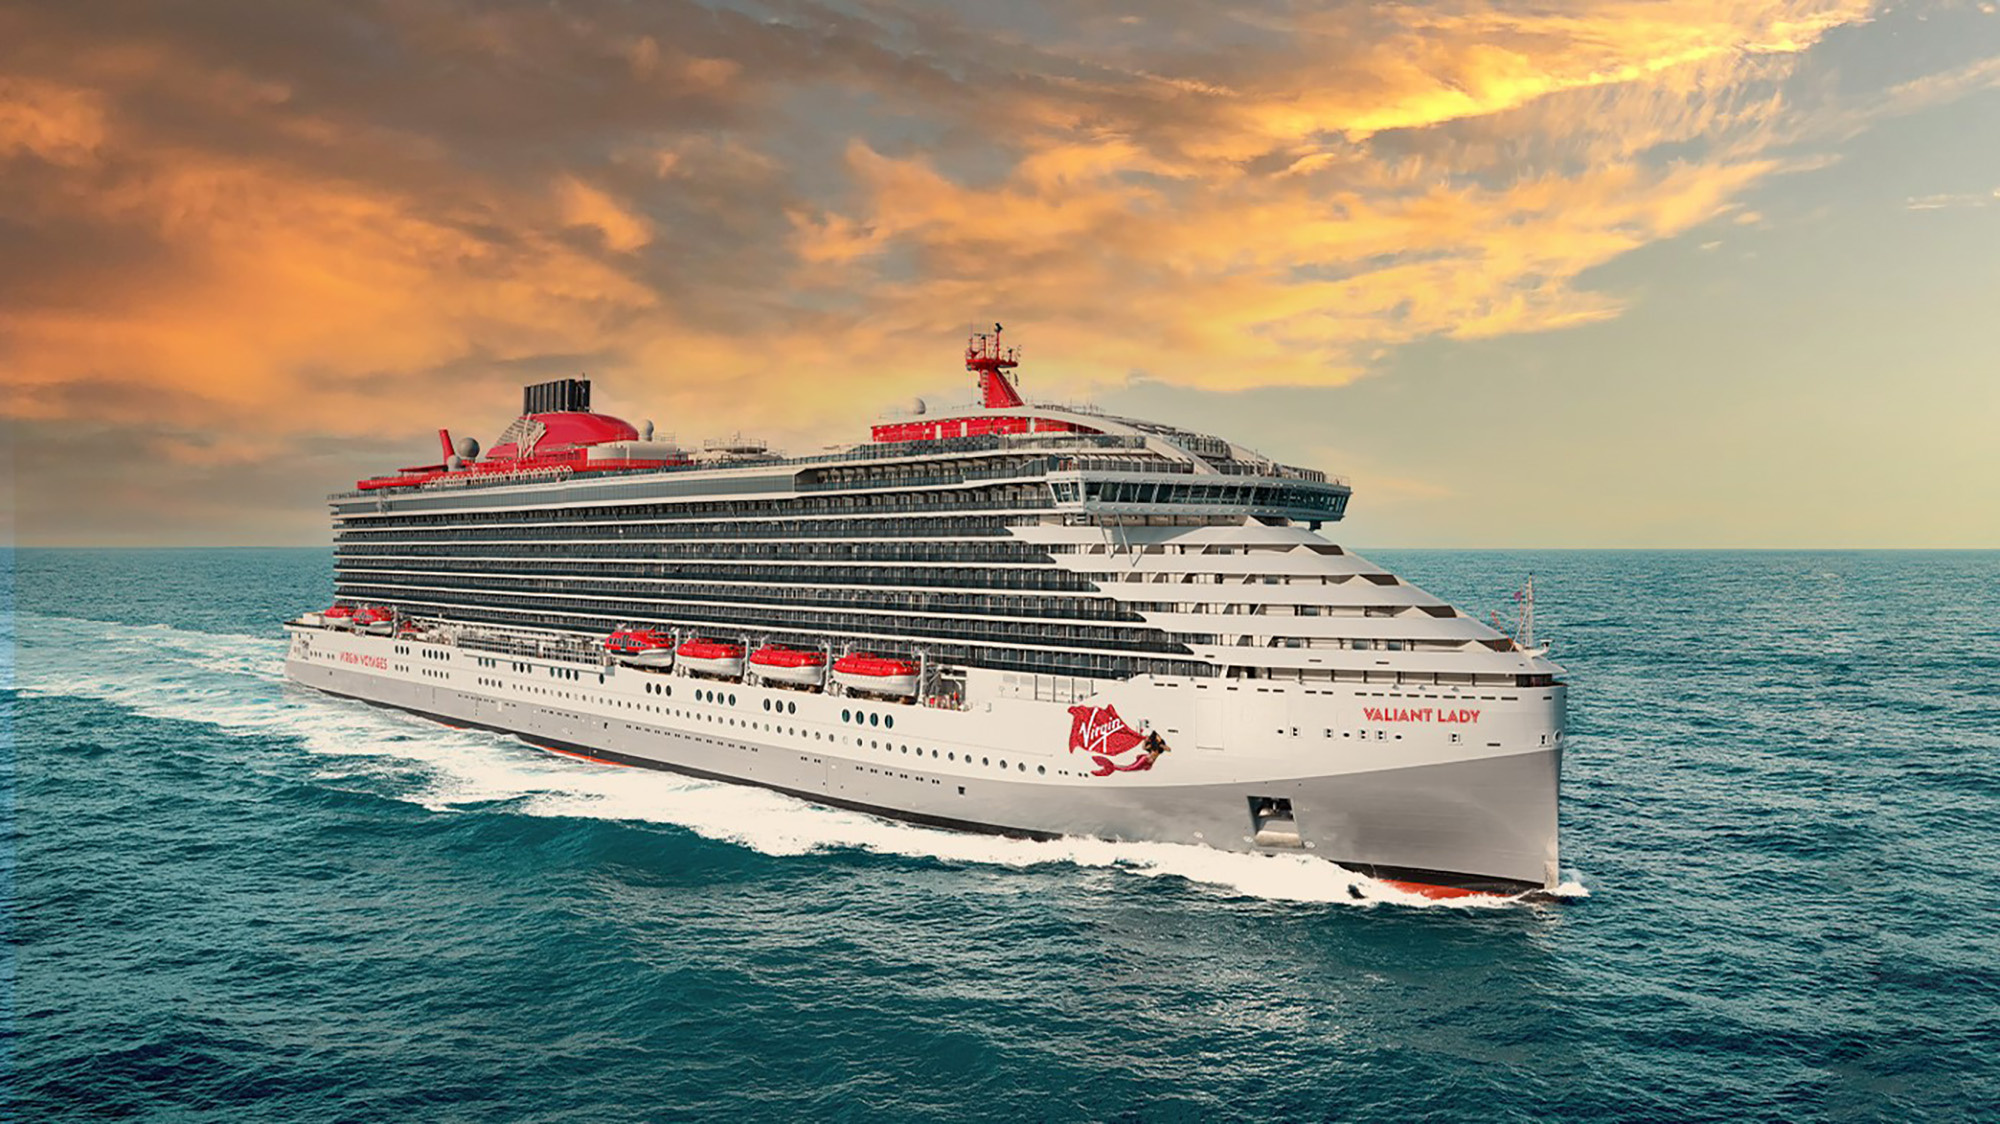 Cruiser (Ship): Valiant Lady, Operated by Virgin Voyages, 80 suites, ranging from 352 square feet. 2000x1130 HD Wallpaper.